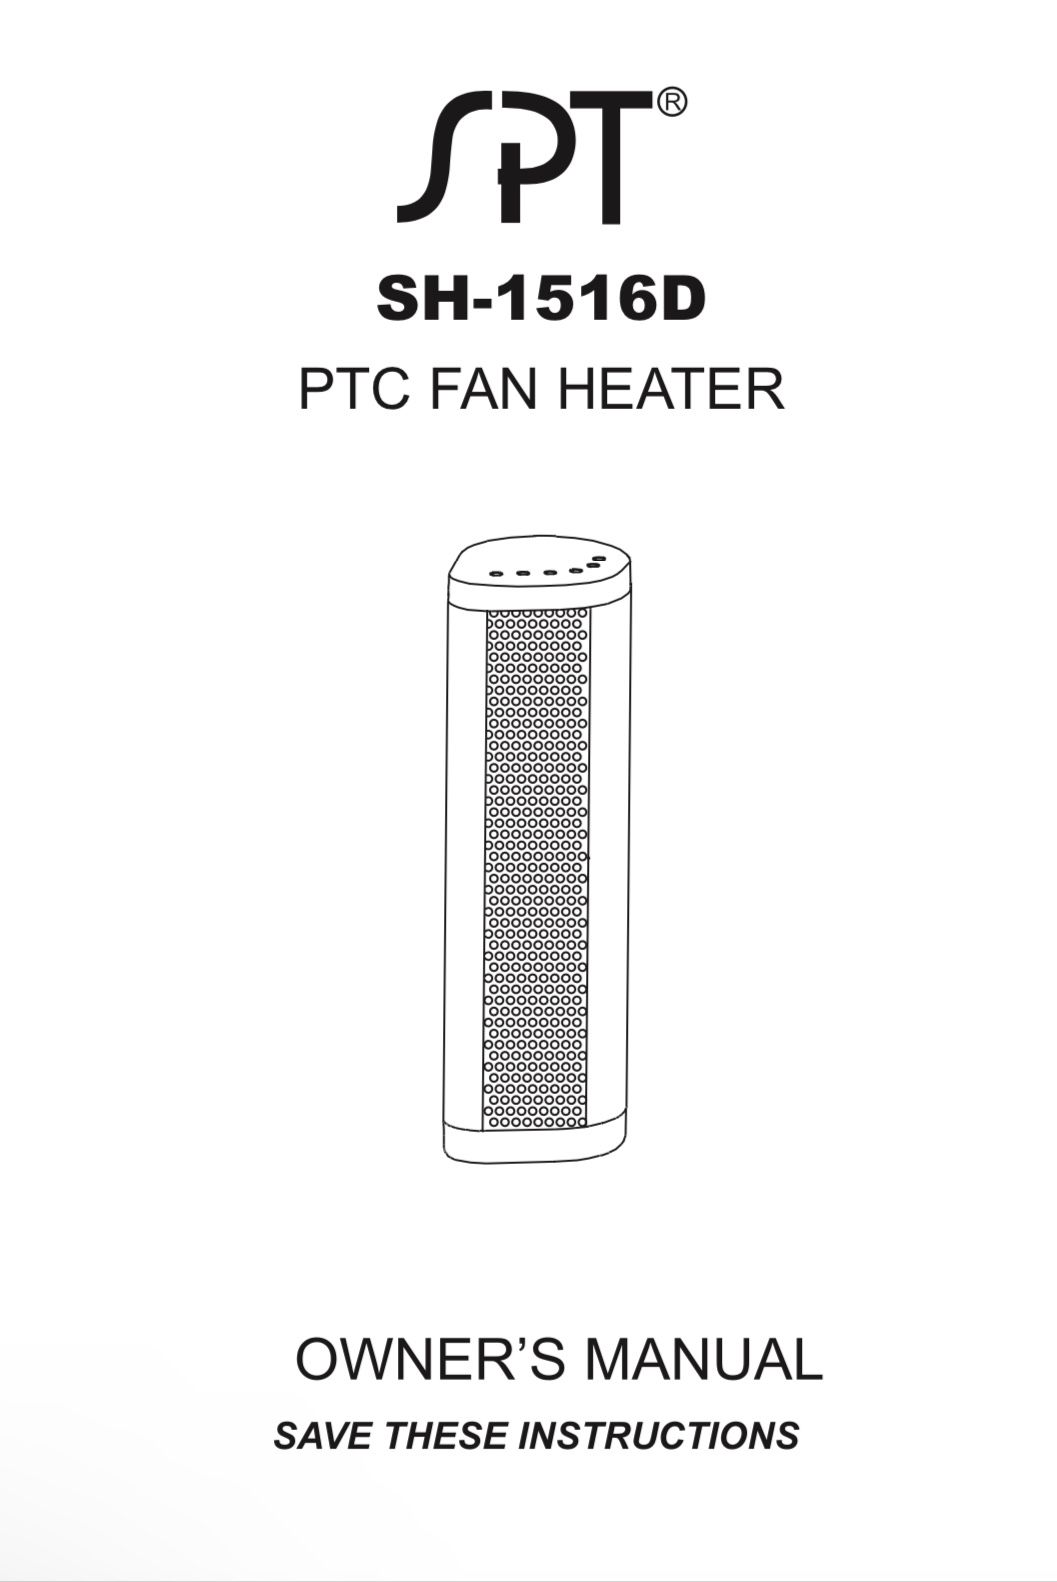 PELONIS NTH15-17BRA Portable 1500W Vertical and Horizontal Ceramic Tower Space Heater, Internal Oscillation, ntrol, Programmable 